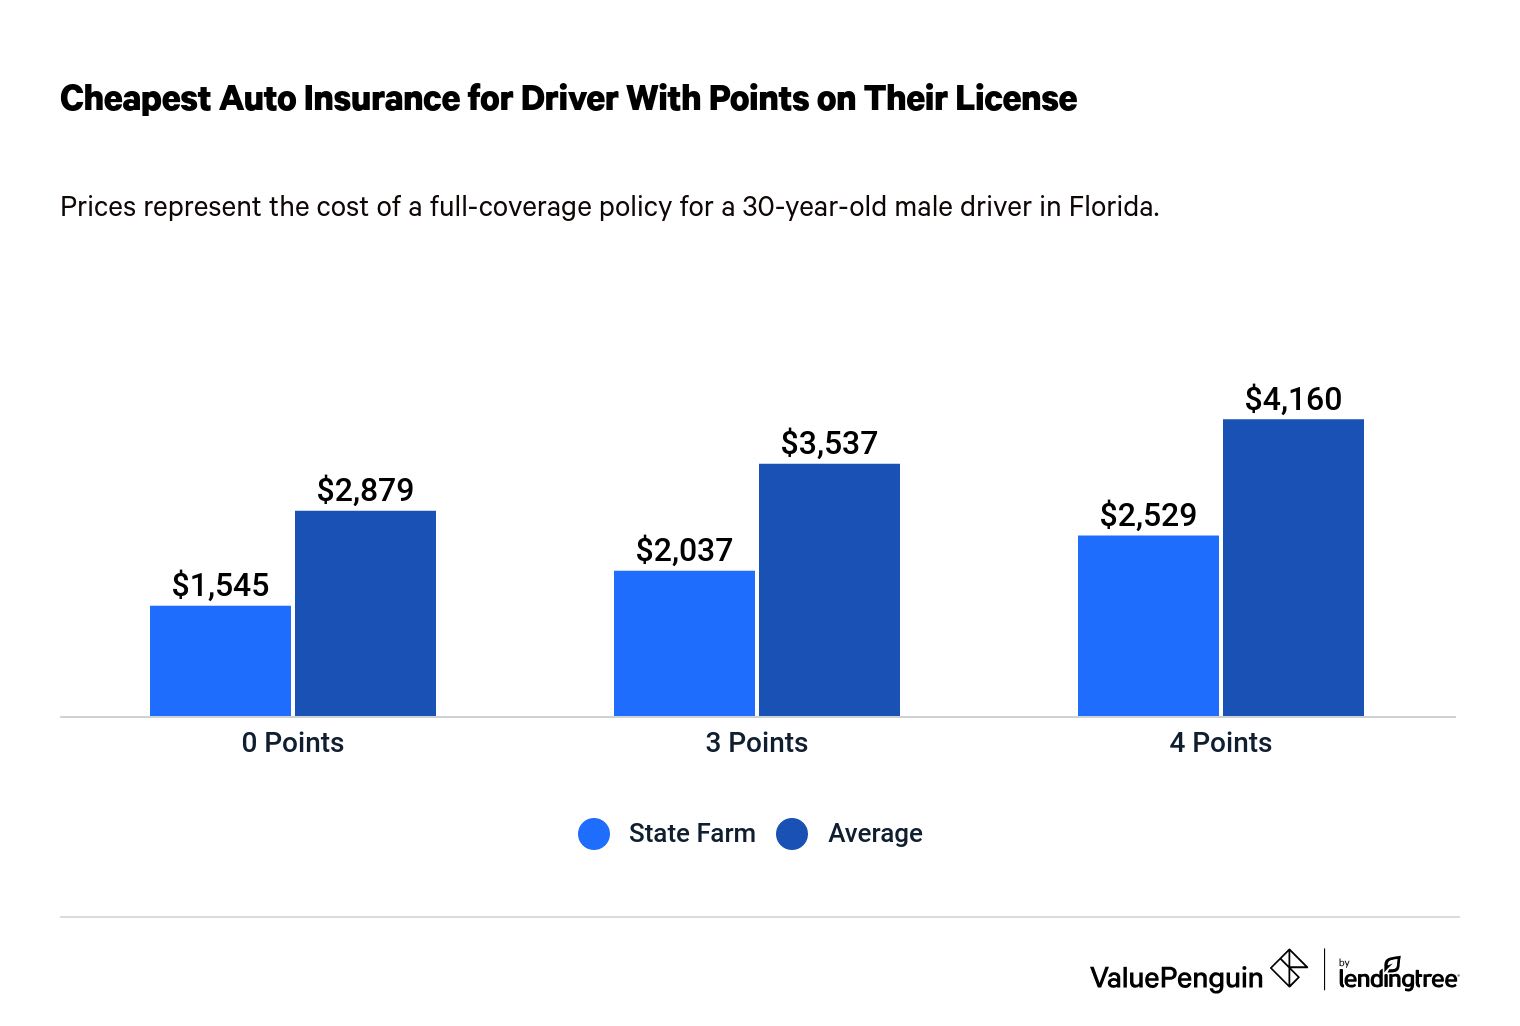 Do Drivers License Points Increase Car Insurance Rates? - Valuepenguin